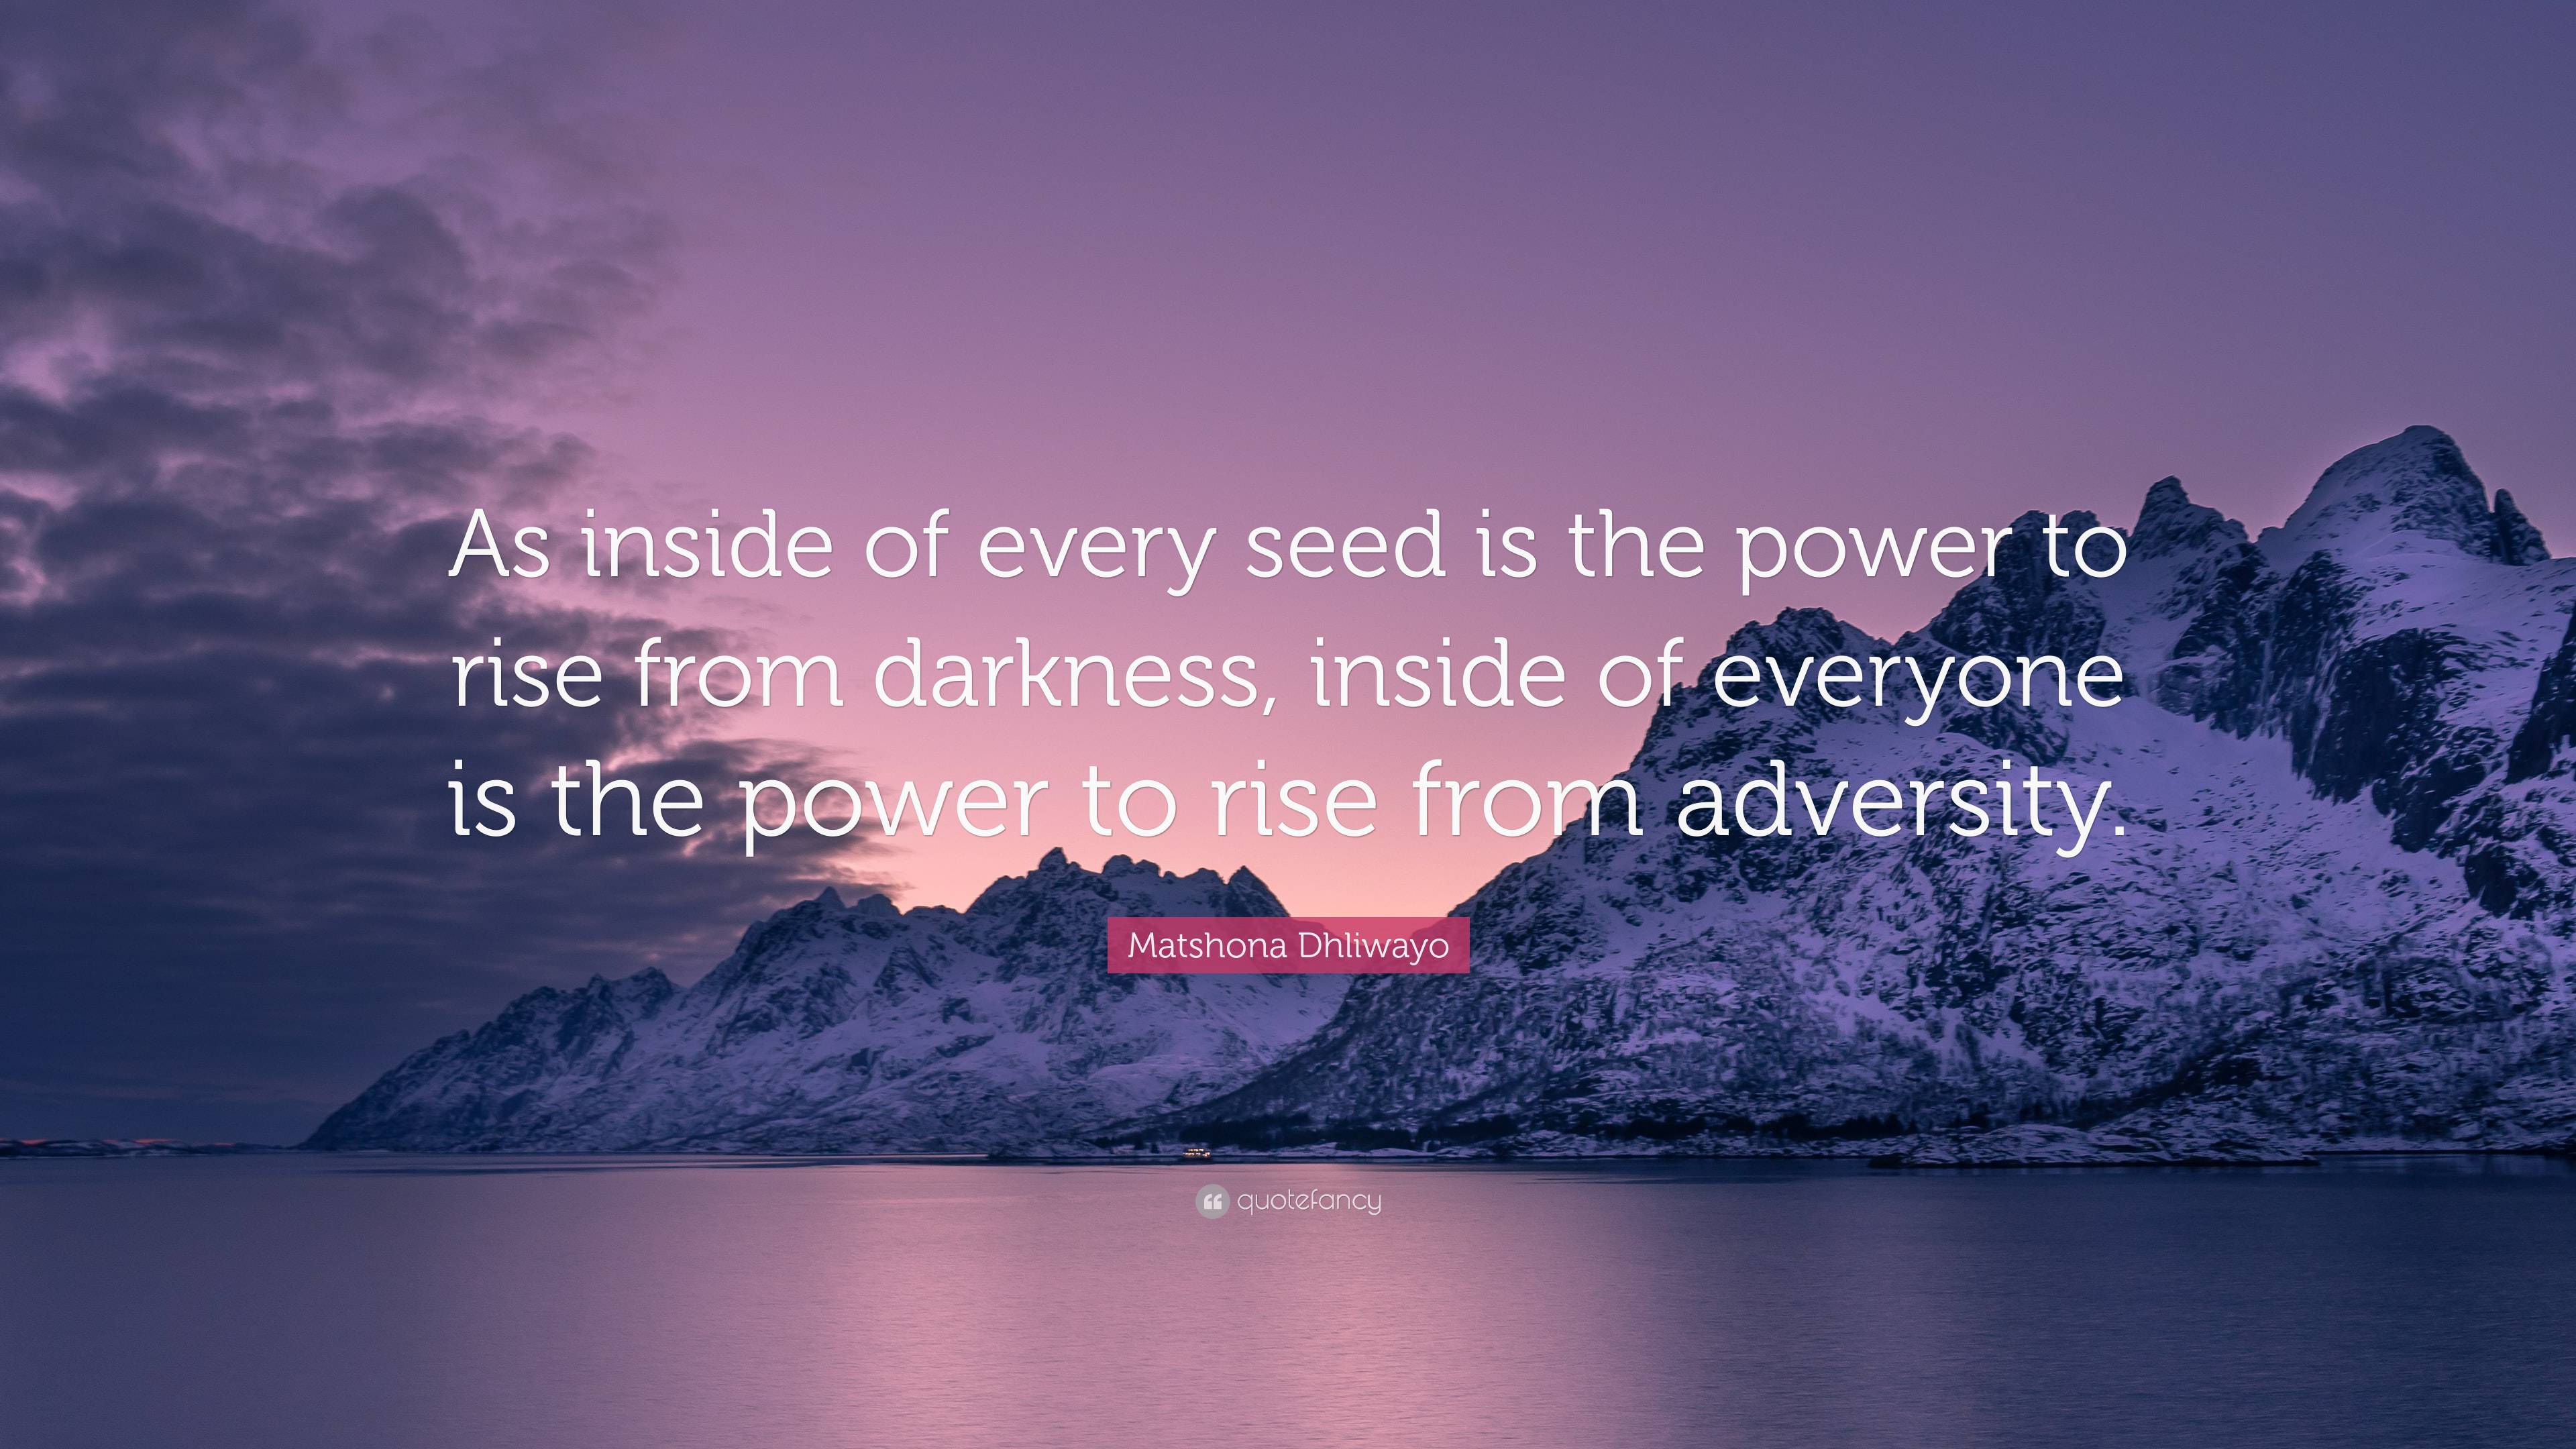 Matshona Dhliwayo Quote: “As inside of every seed is the power to rise ...